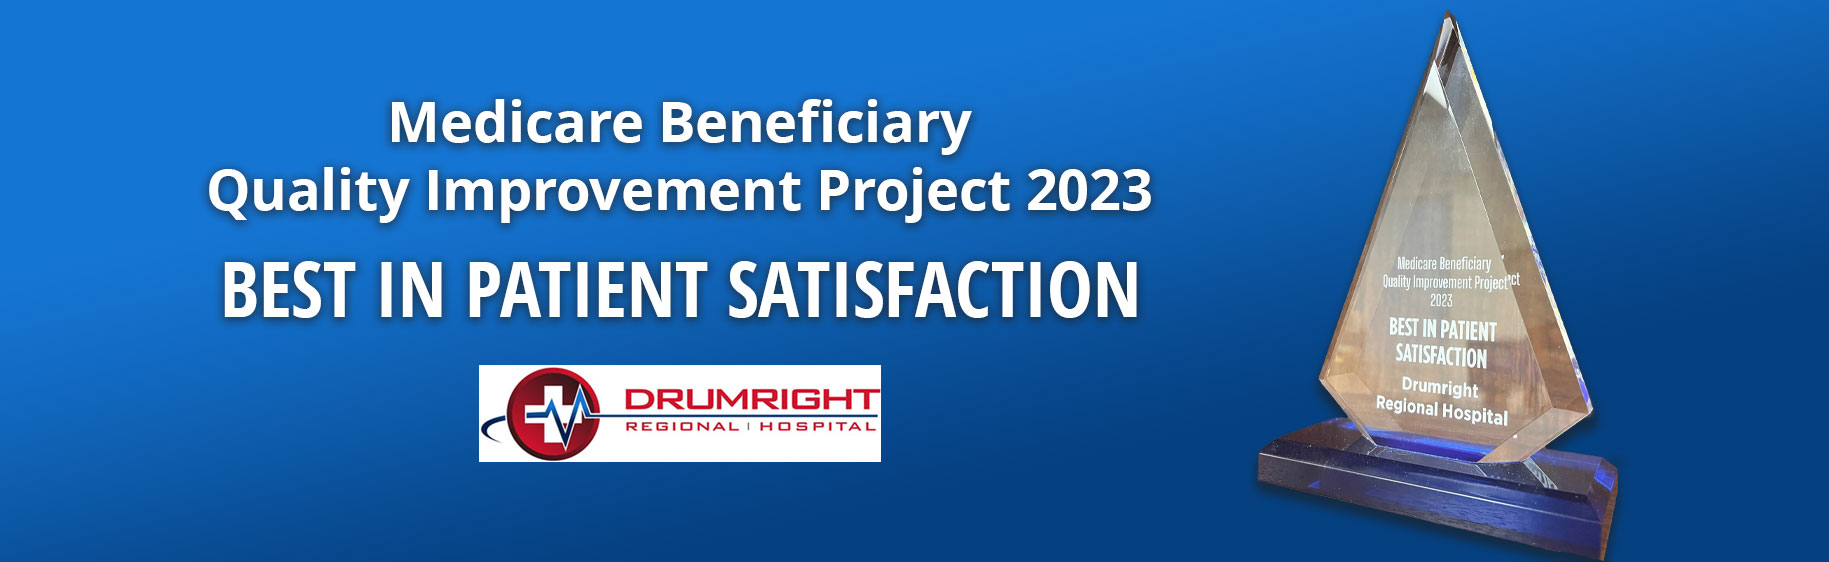 Medicare Beneficiary Quality Impovement Project 2023

BEST IN PATIENT SATISFACTION